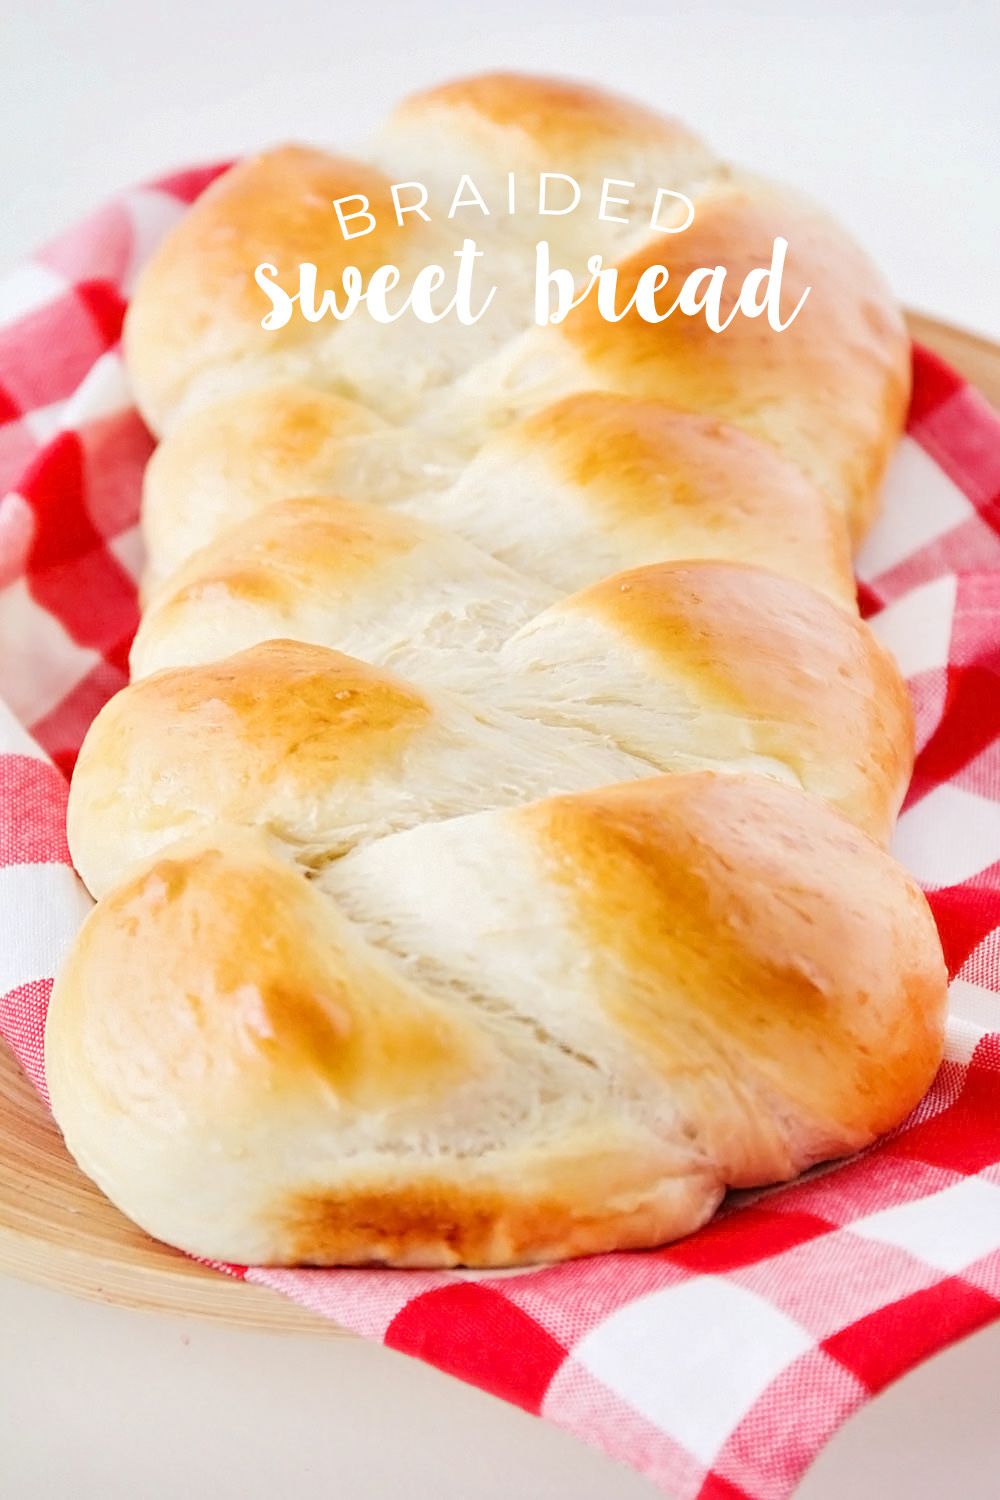 This soft and sweet braided bread is simple and easy to make, and so delicious! 